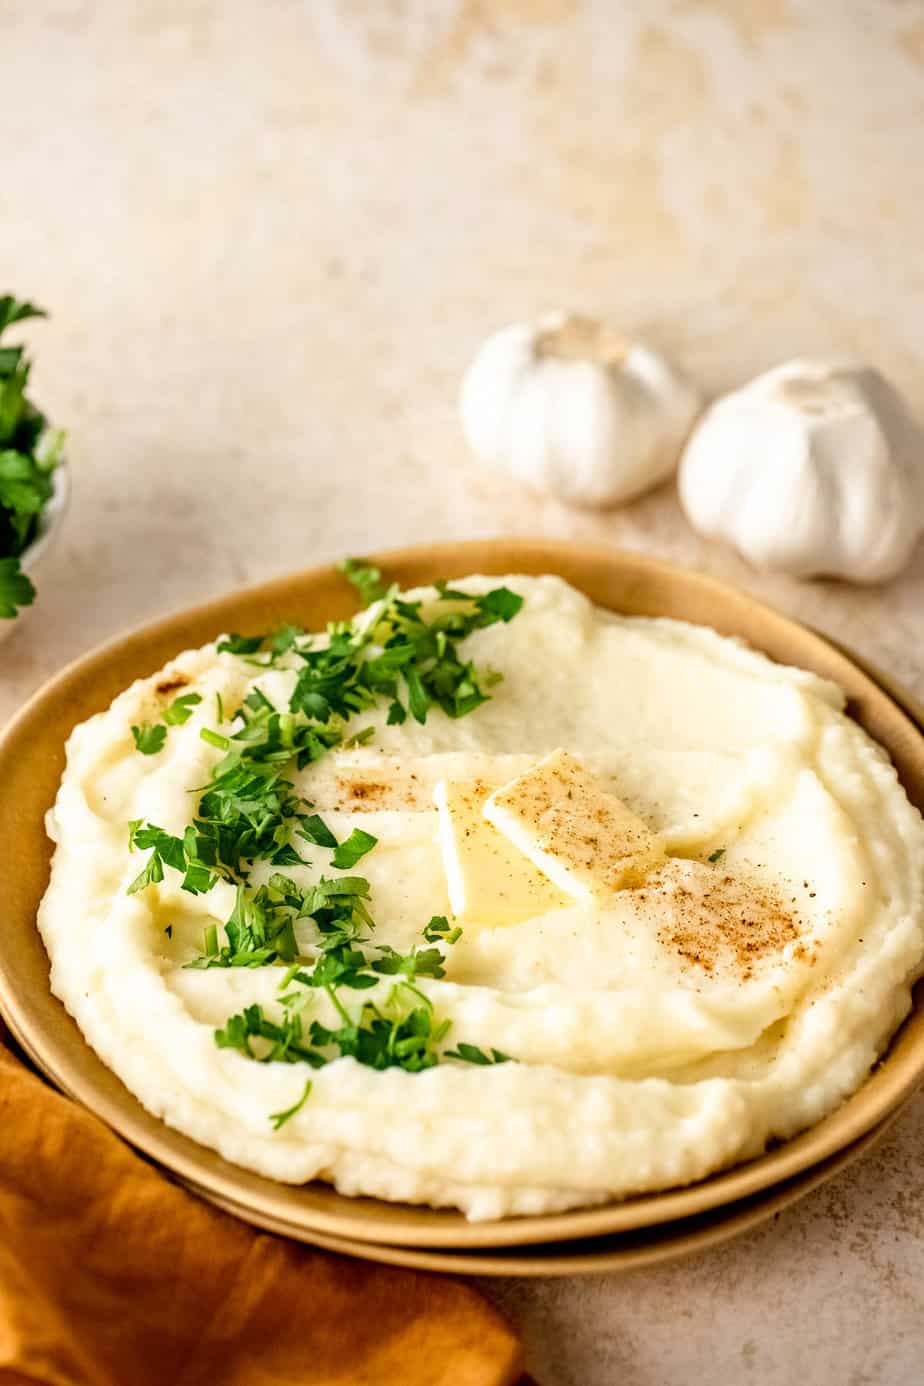 A bowl of mashed potatoes with butter, pepper, and fresh herbs.